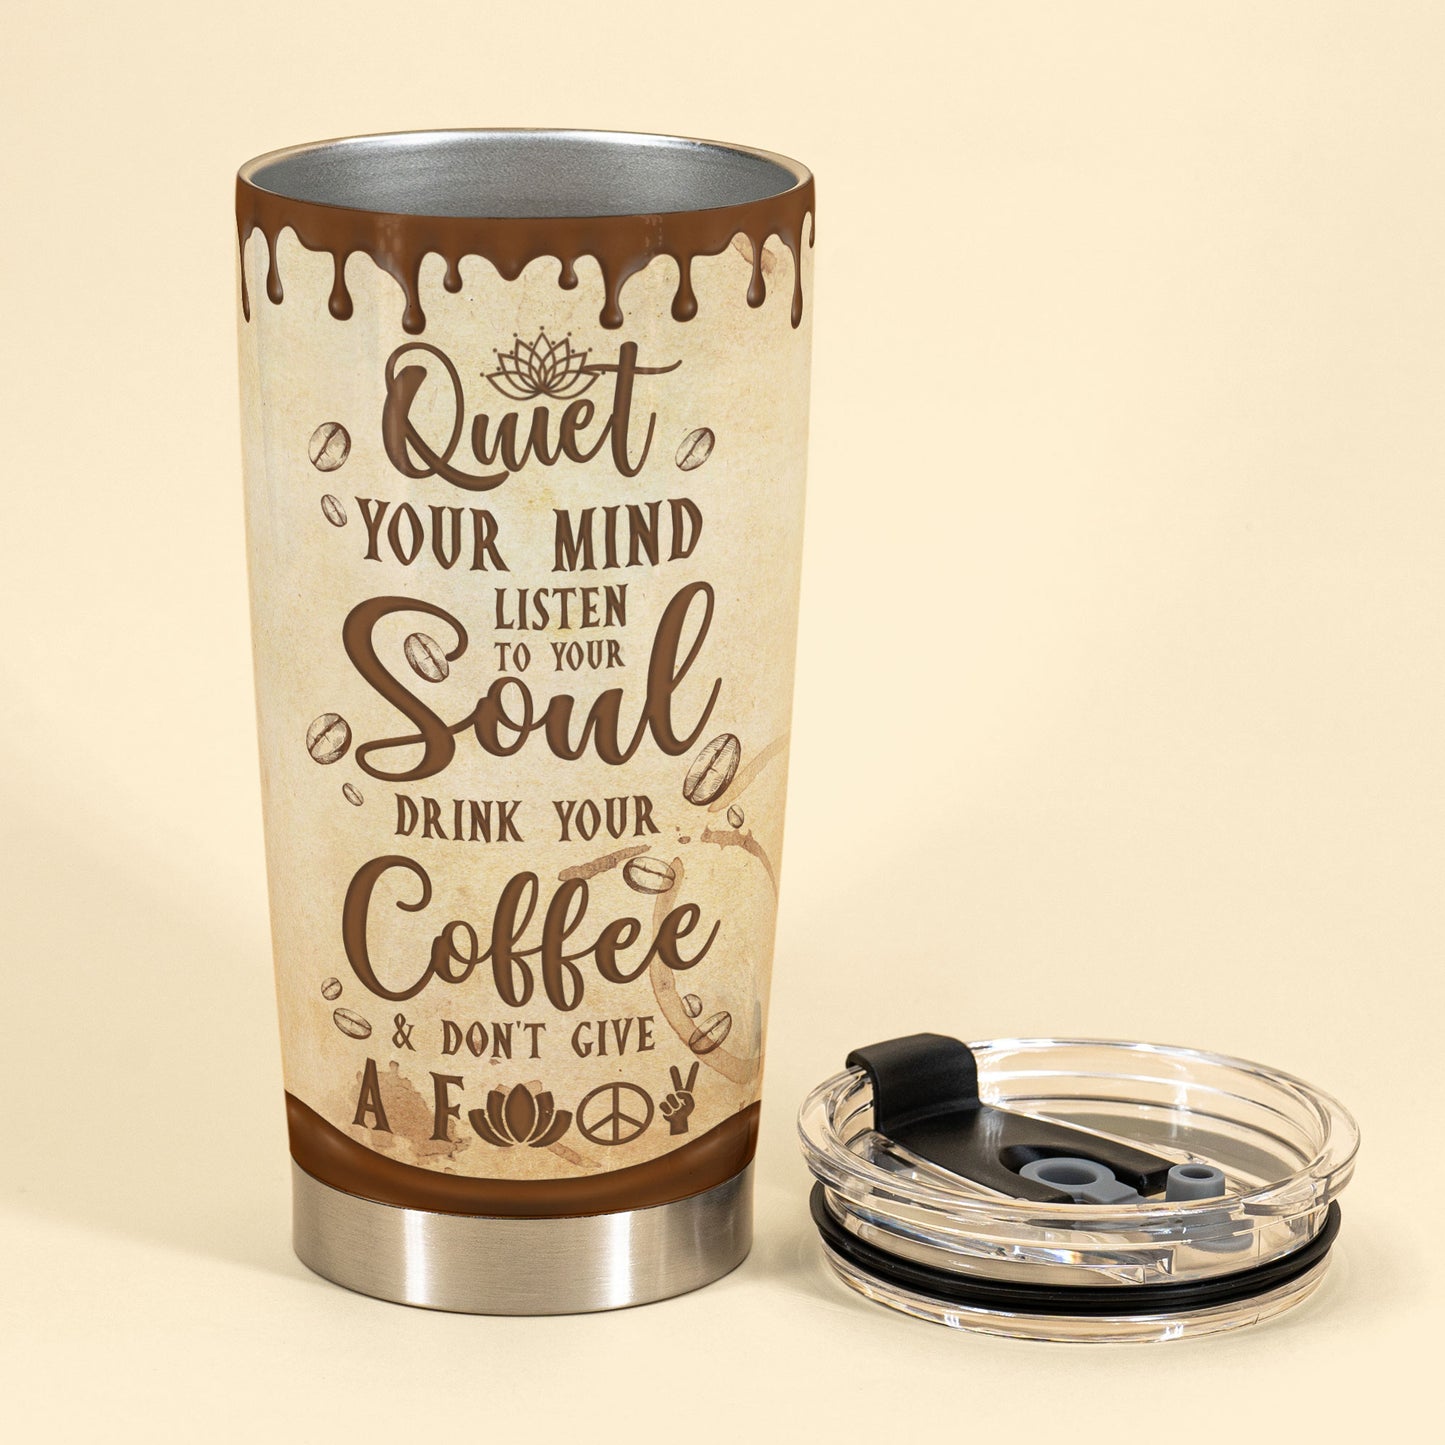 Yoga And Drink Coffee - Personalized Tumbler Cup - Birthday Gift For Yoga And Coffee Lover, Meditation Mom, Caffeine Girl